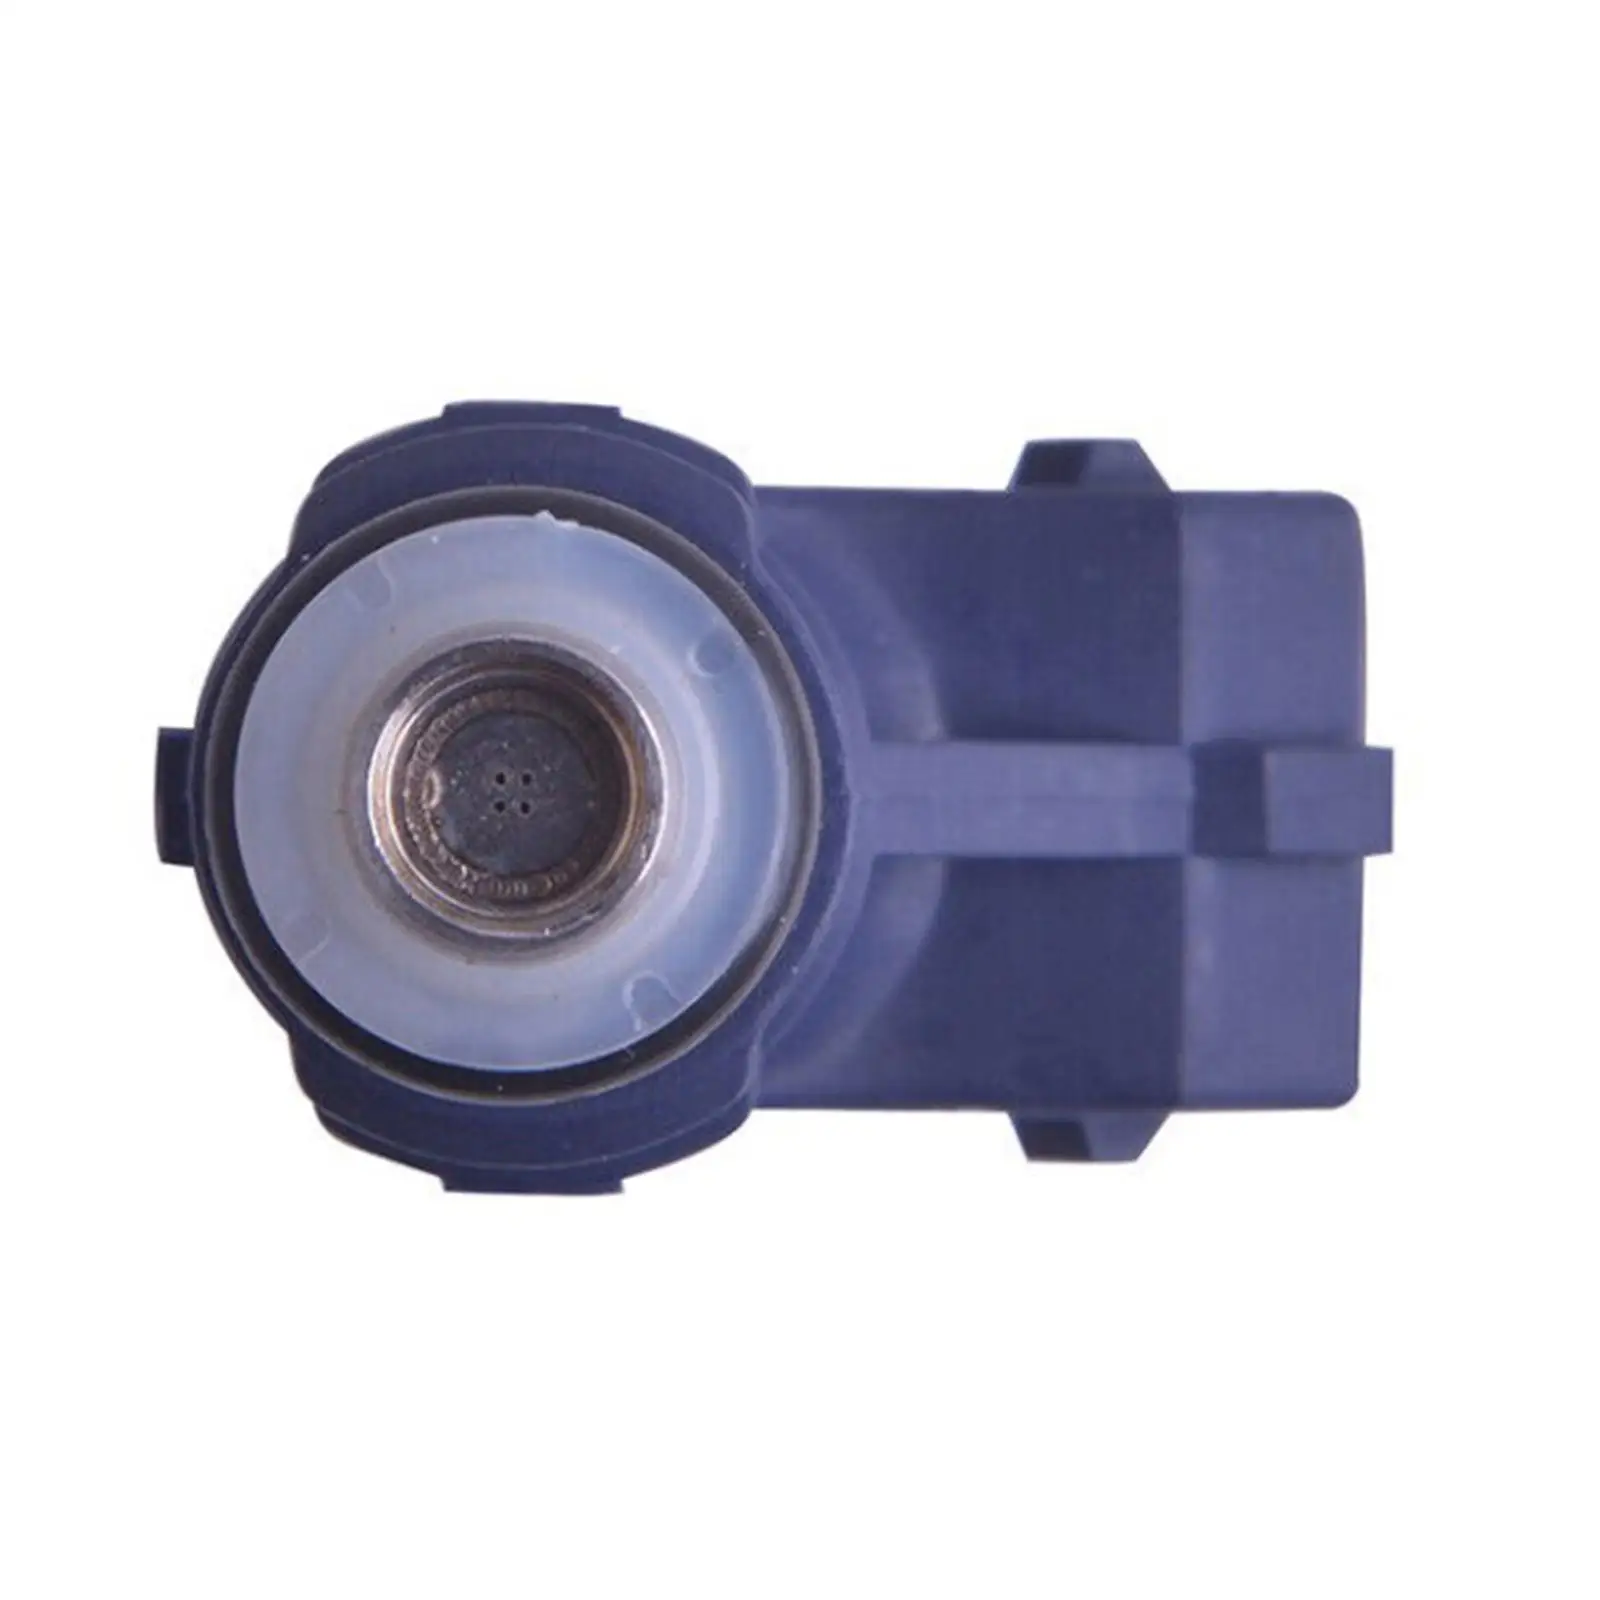 A1120780149 Fuel Injector Replaces Parts Spare Parts High Performance for CLK320 E320 C240 Easy Installation Accessories